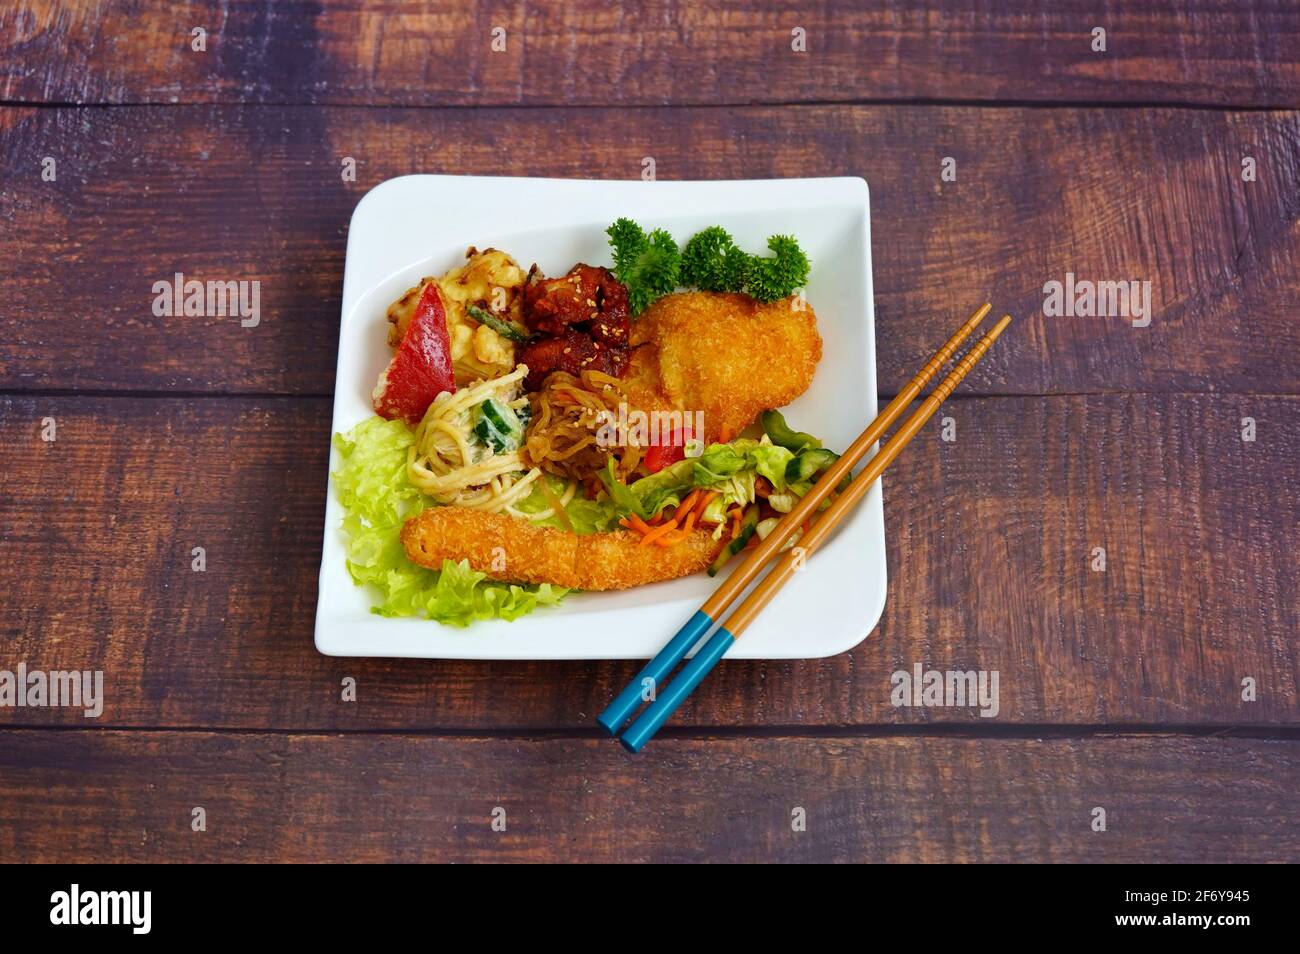 Assortment of typical Japanese home-cooked food on a white plate. Stock Photo